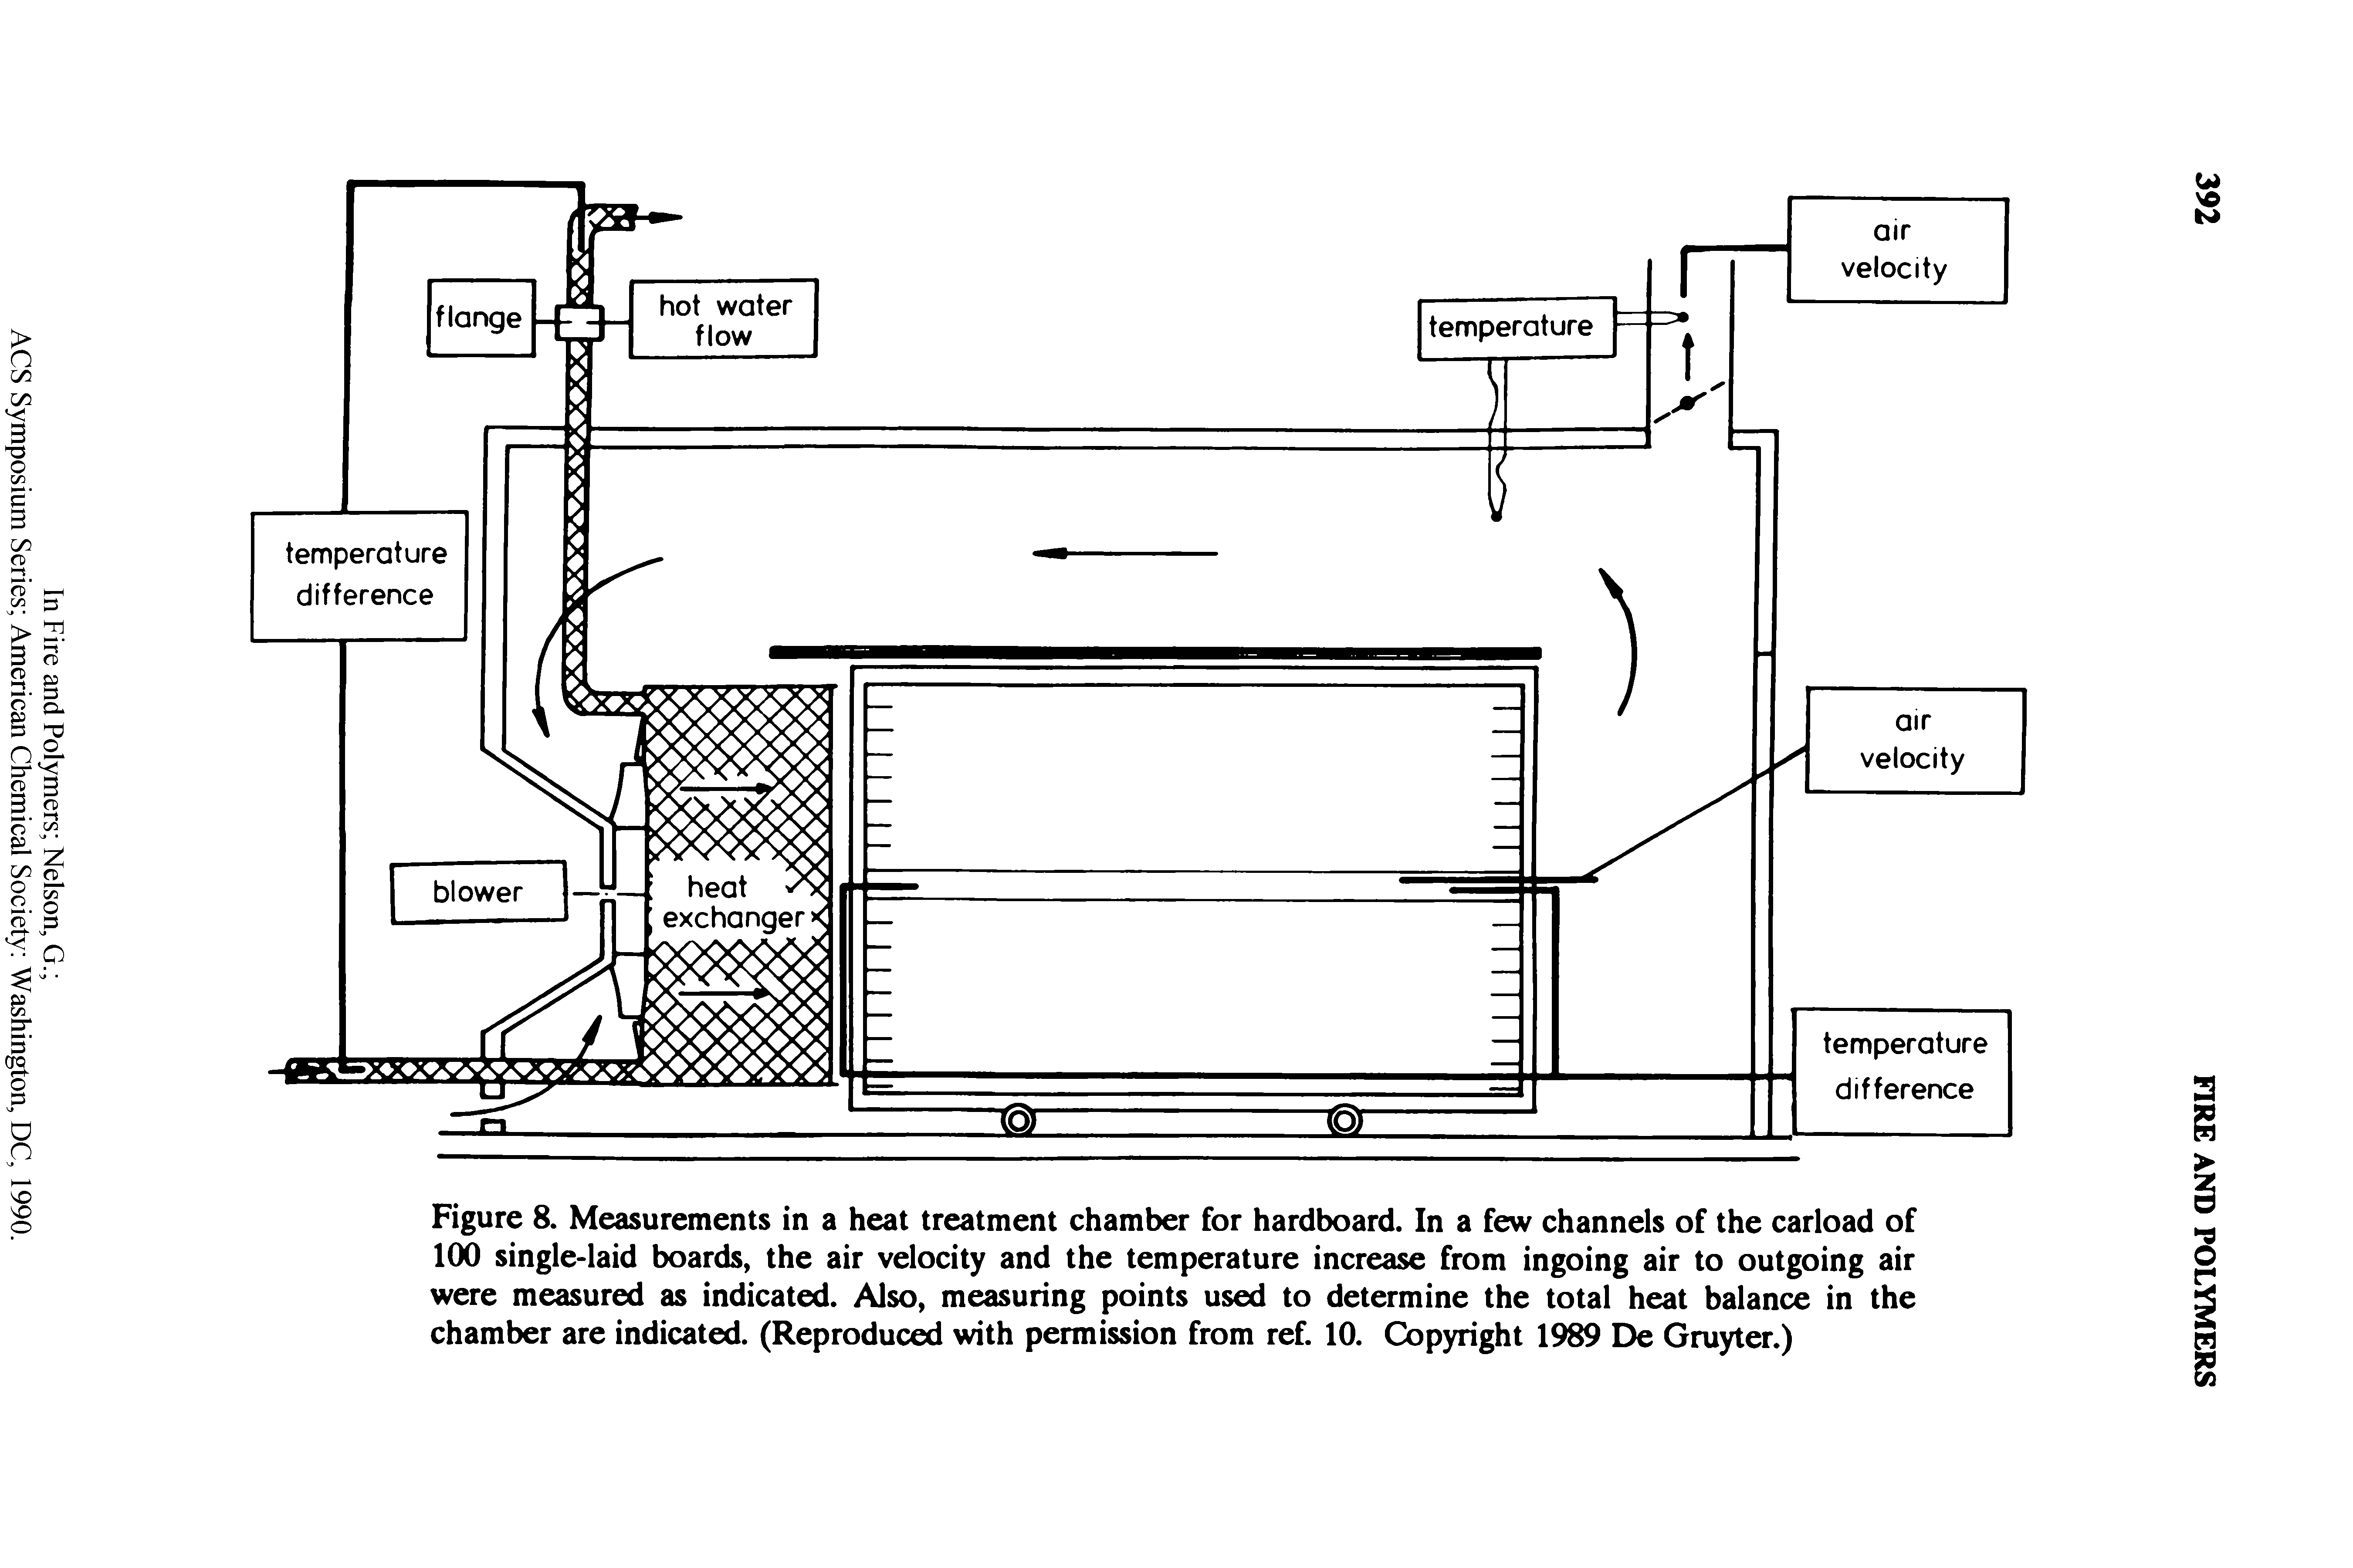 Figure 8. Measurements in a heat treatment chamber for hardboard. In a few channels of the carload of 100 single-laid boards, the air velocity and the temperature increase from ingoing air to outgoing air were measured as indicated. Also, measuring points used to determine the total heat balance in the chamber are indicated. (Reproduced with permission from ref. 10. Copyright 1989 De Gruyter.)...